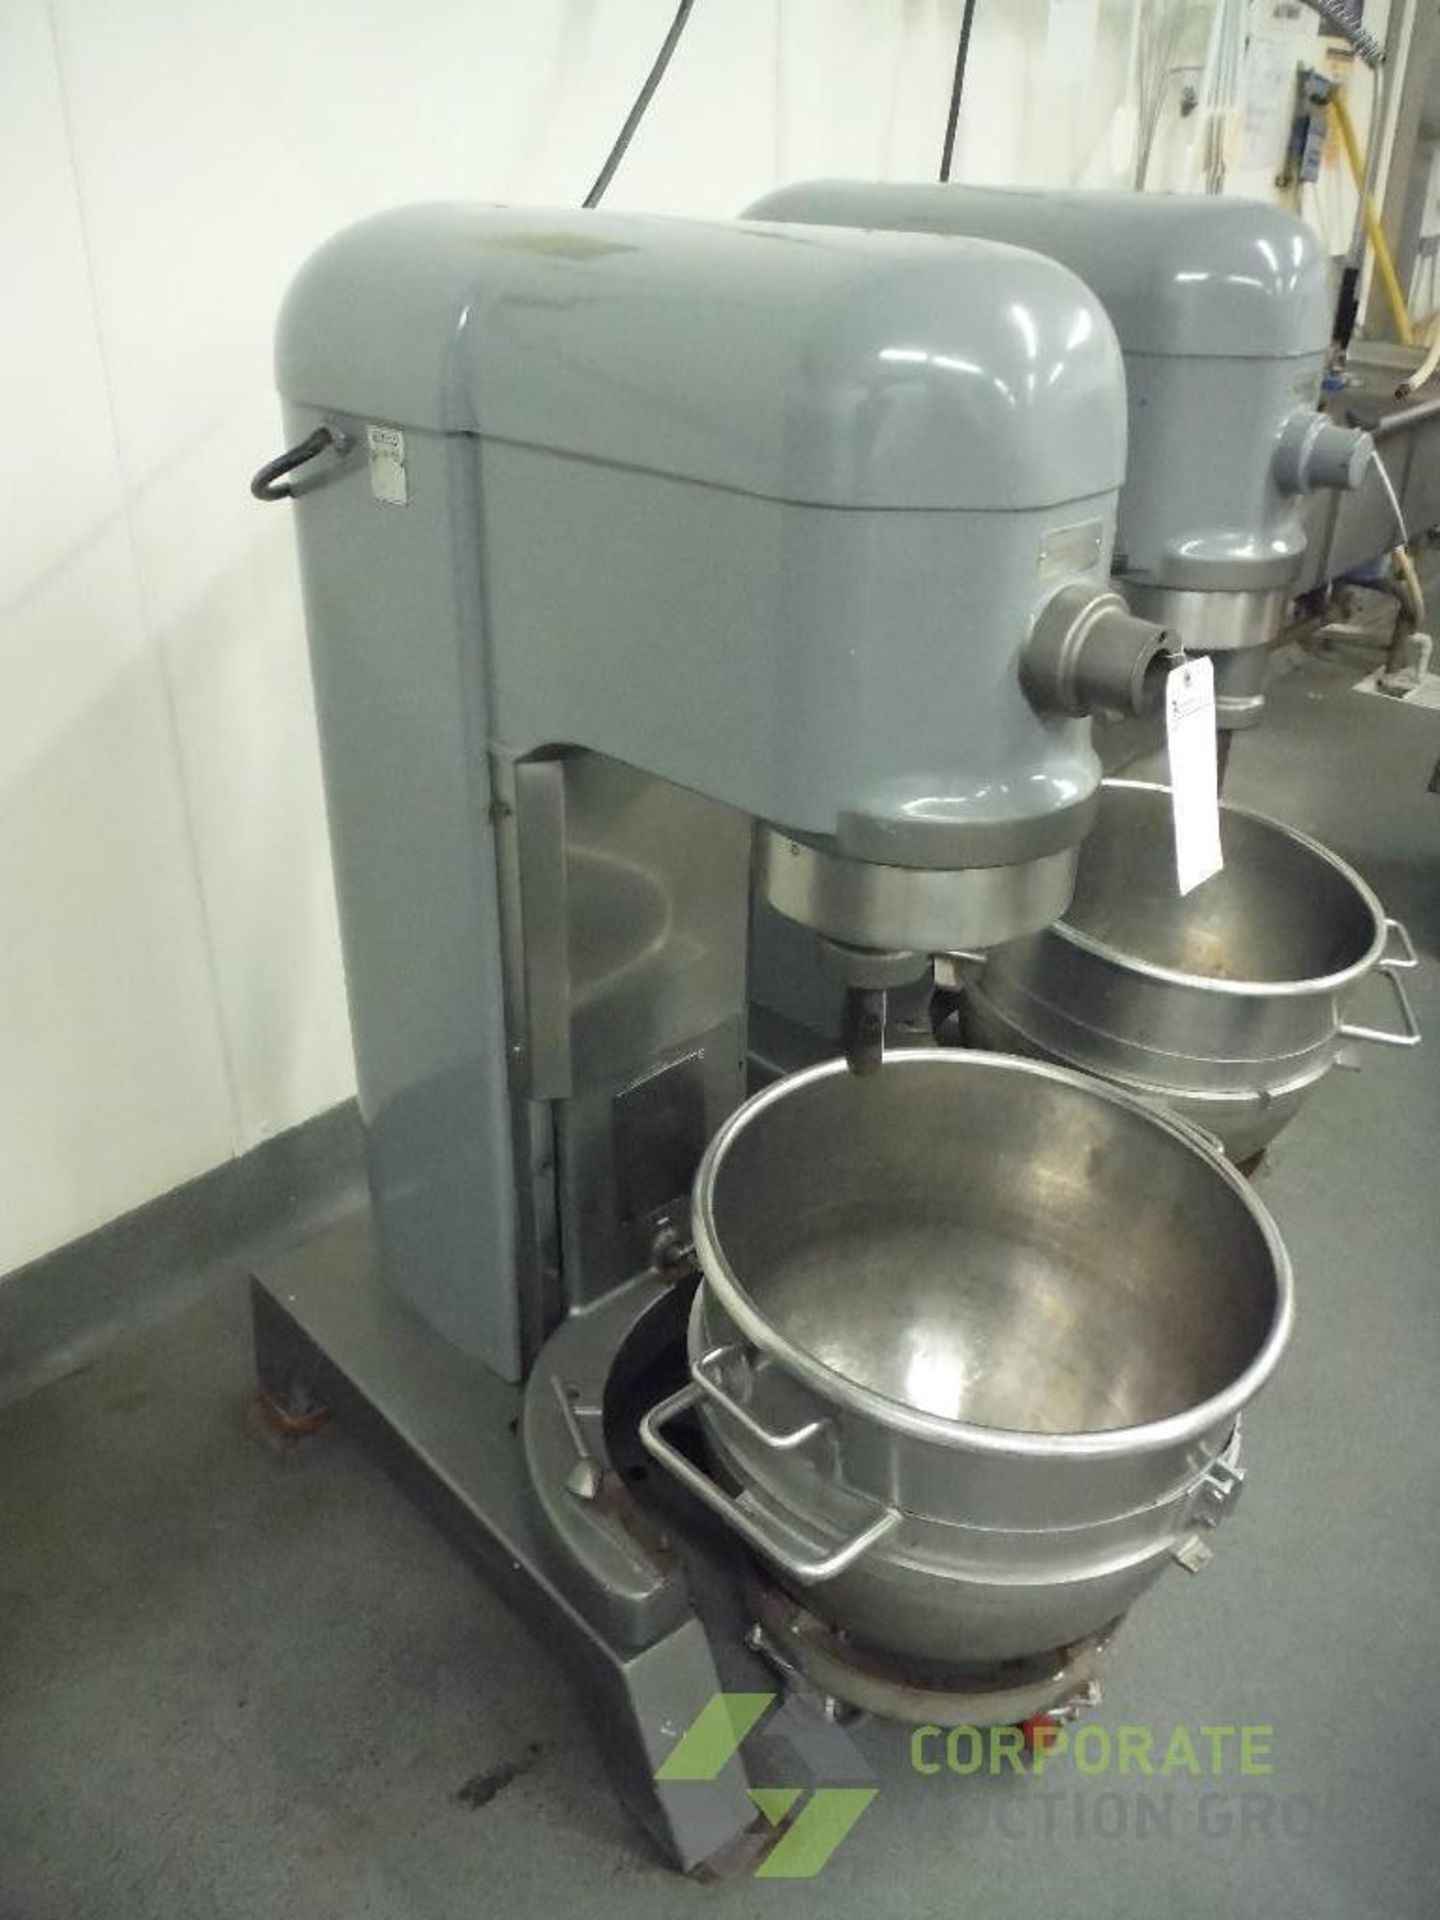 Hobart 80 qt. mixer, Model L 800, SN 11-351-008, with SS bowl, dolly - Image 7 of 8